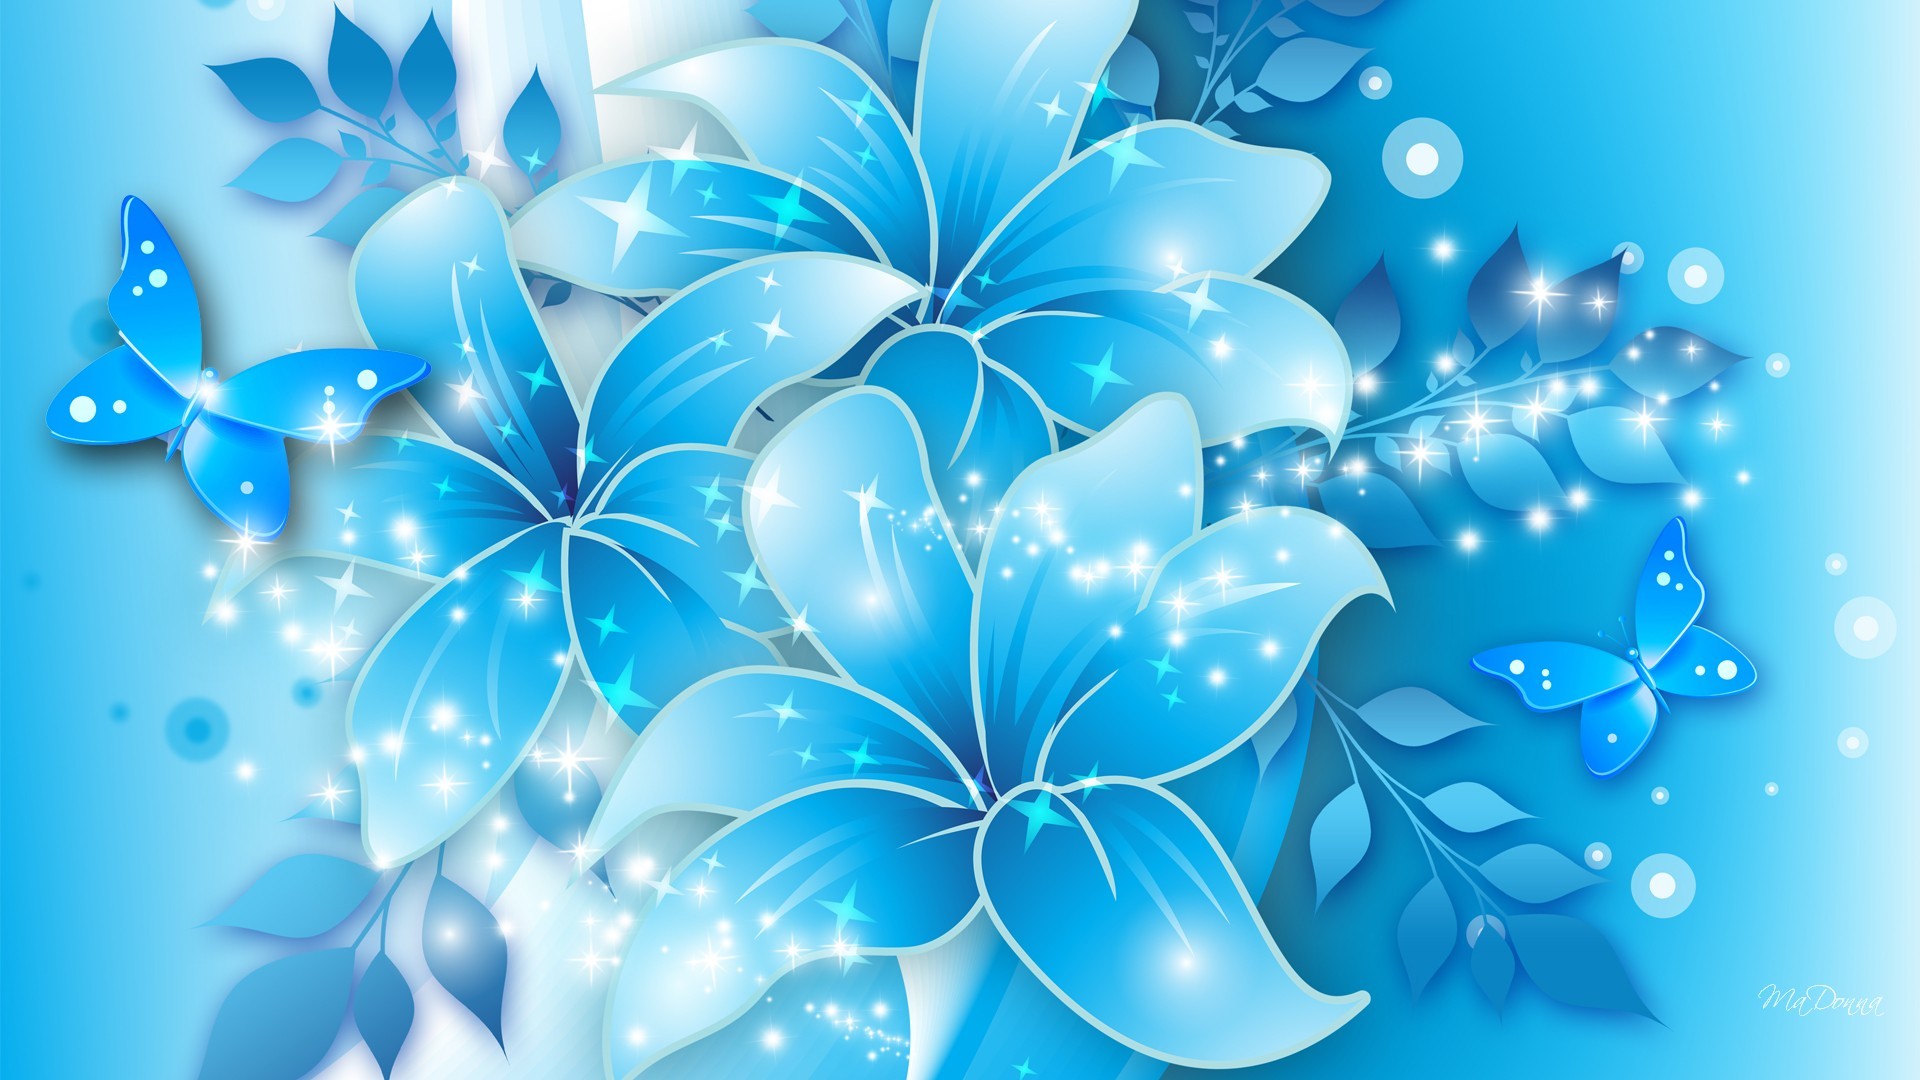 Pretty blue background pictures